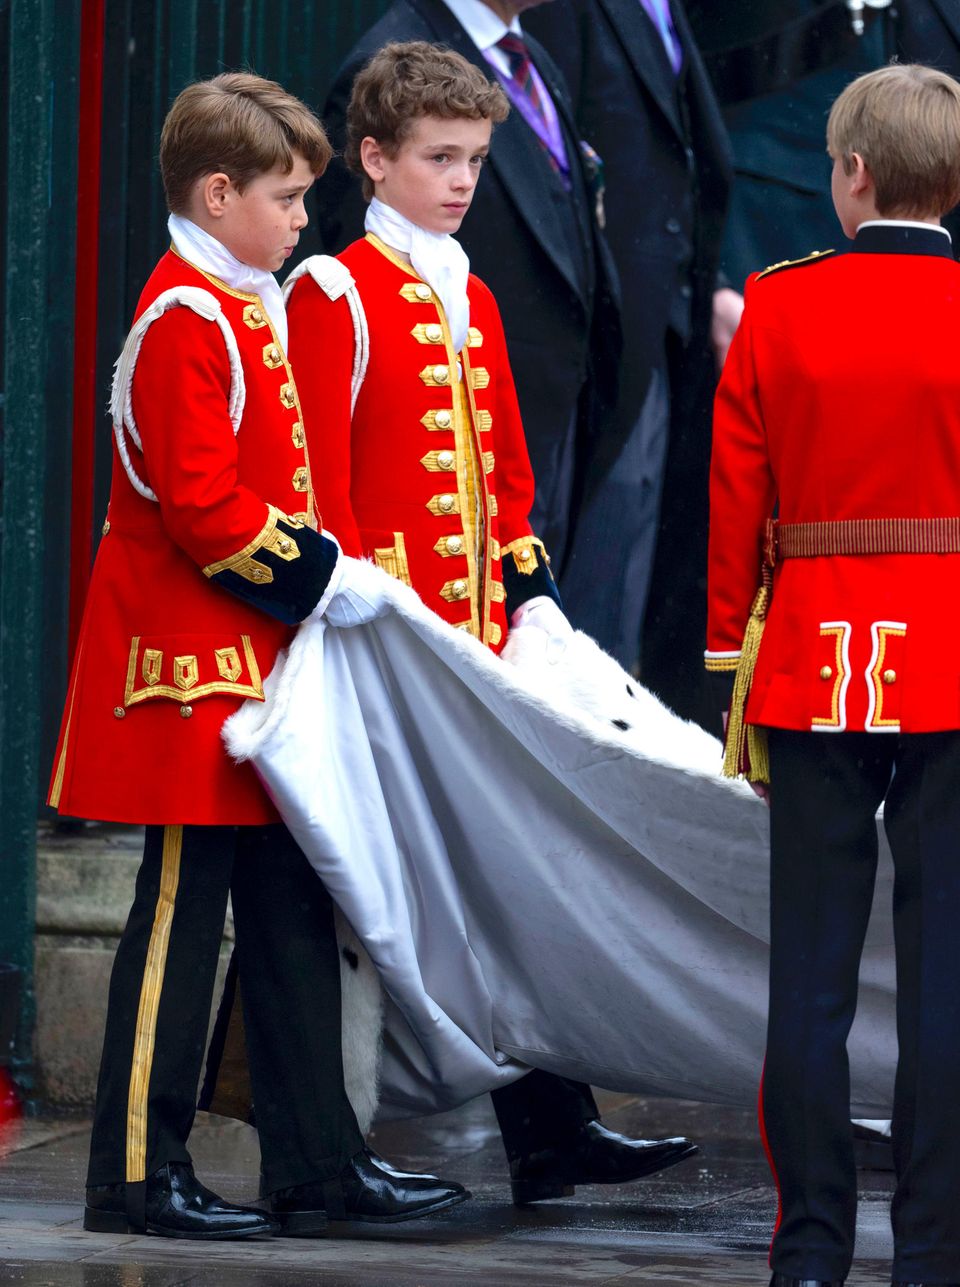 On Coronation Day, Prince George was page of honor alongside Nicholas Barclay, responsible for carrying King Charles' train.